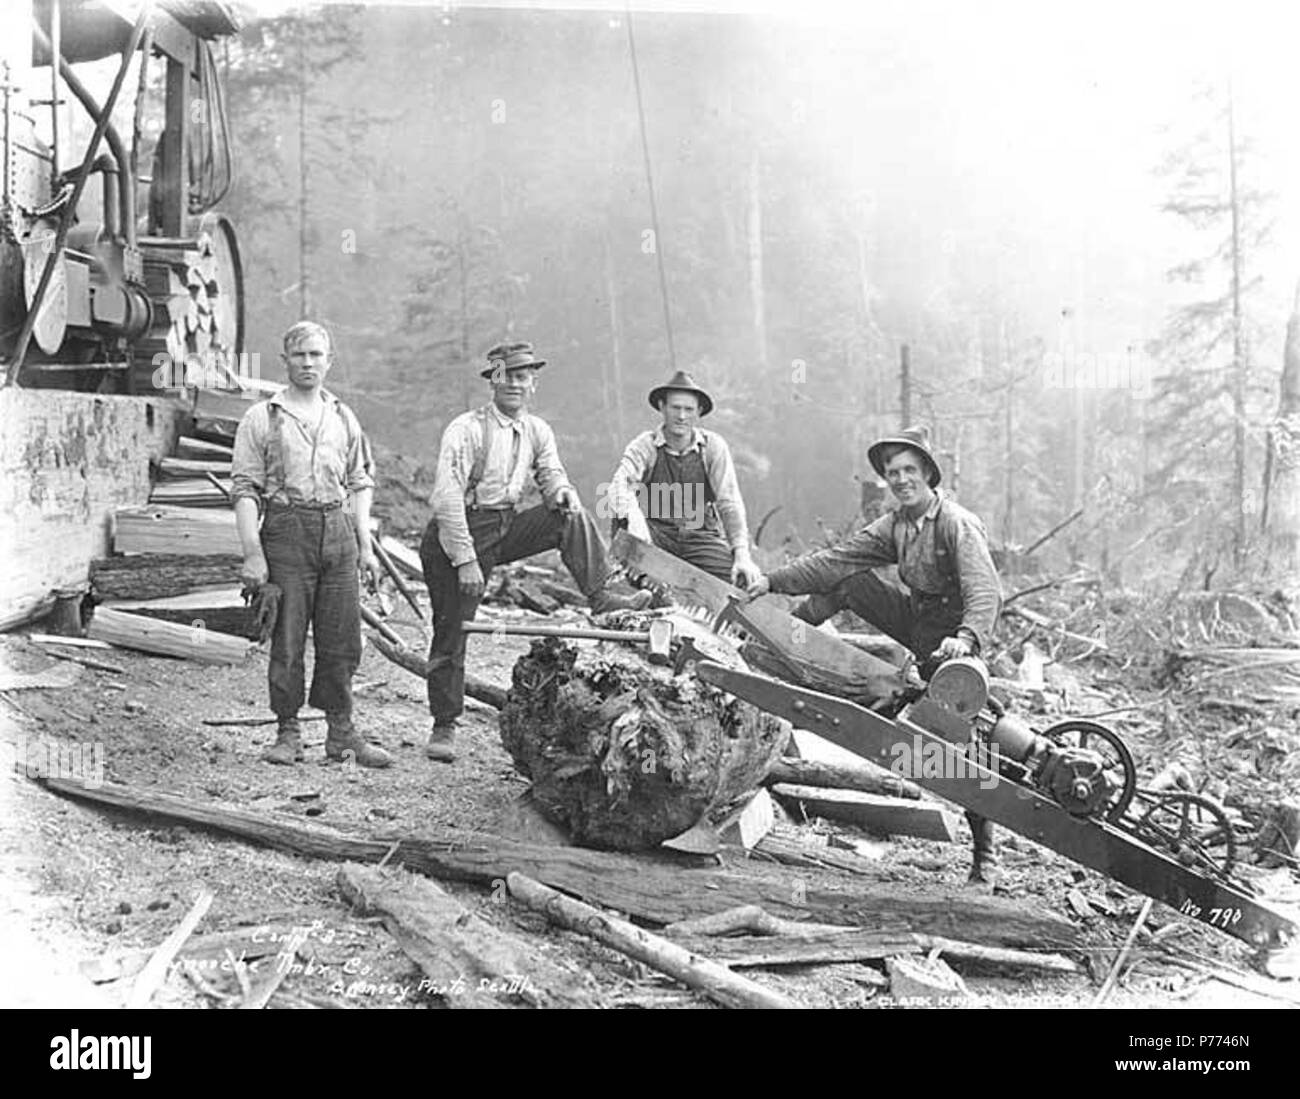 . English: Logging crew with gasoline-powered dragsaw beside donkey engine, Wynooche Timber Company camp no. 3, ca. 1921 . English: Caption on image: Camp No. 3, Wynooche Tmbr Co. C. Kinsey Photo, Seattle. No. 790 PH Coll 516.5218 The Wynooche Timber Company began operations ca. 1913 with headquarters in Hoquiam and logging operations in Montesano. It was named for Wynooche Valley in northeast Grays Harbor County. Wynooche Timber Company was bought out by Schafer Brothers Logging Company ca. 1927. Subjects (LCTGM): Wynooche Timber Company--People--Washington (State); Wynooche Timber Company--E Stock Photo